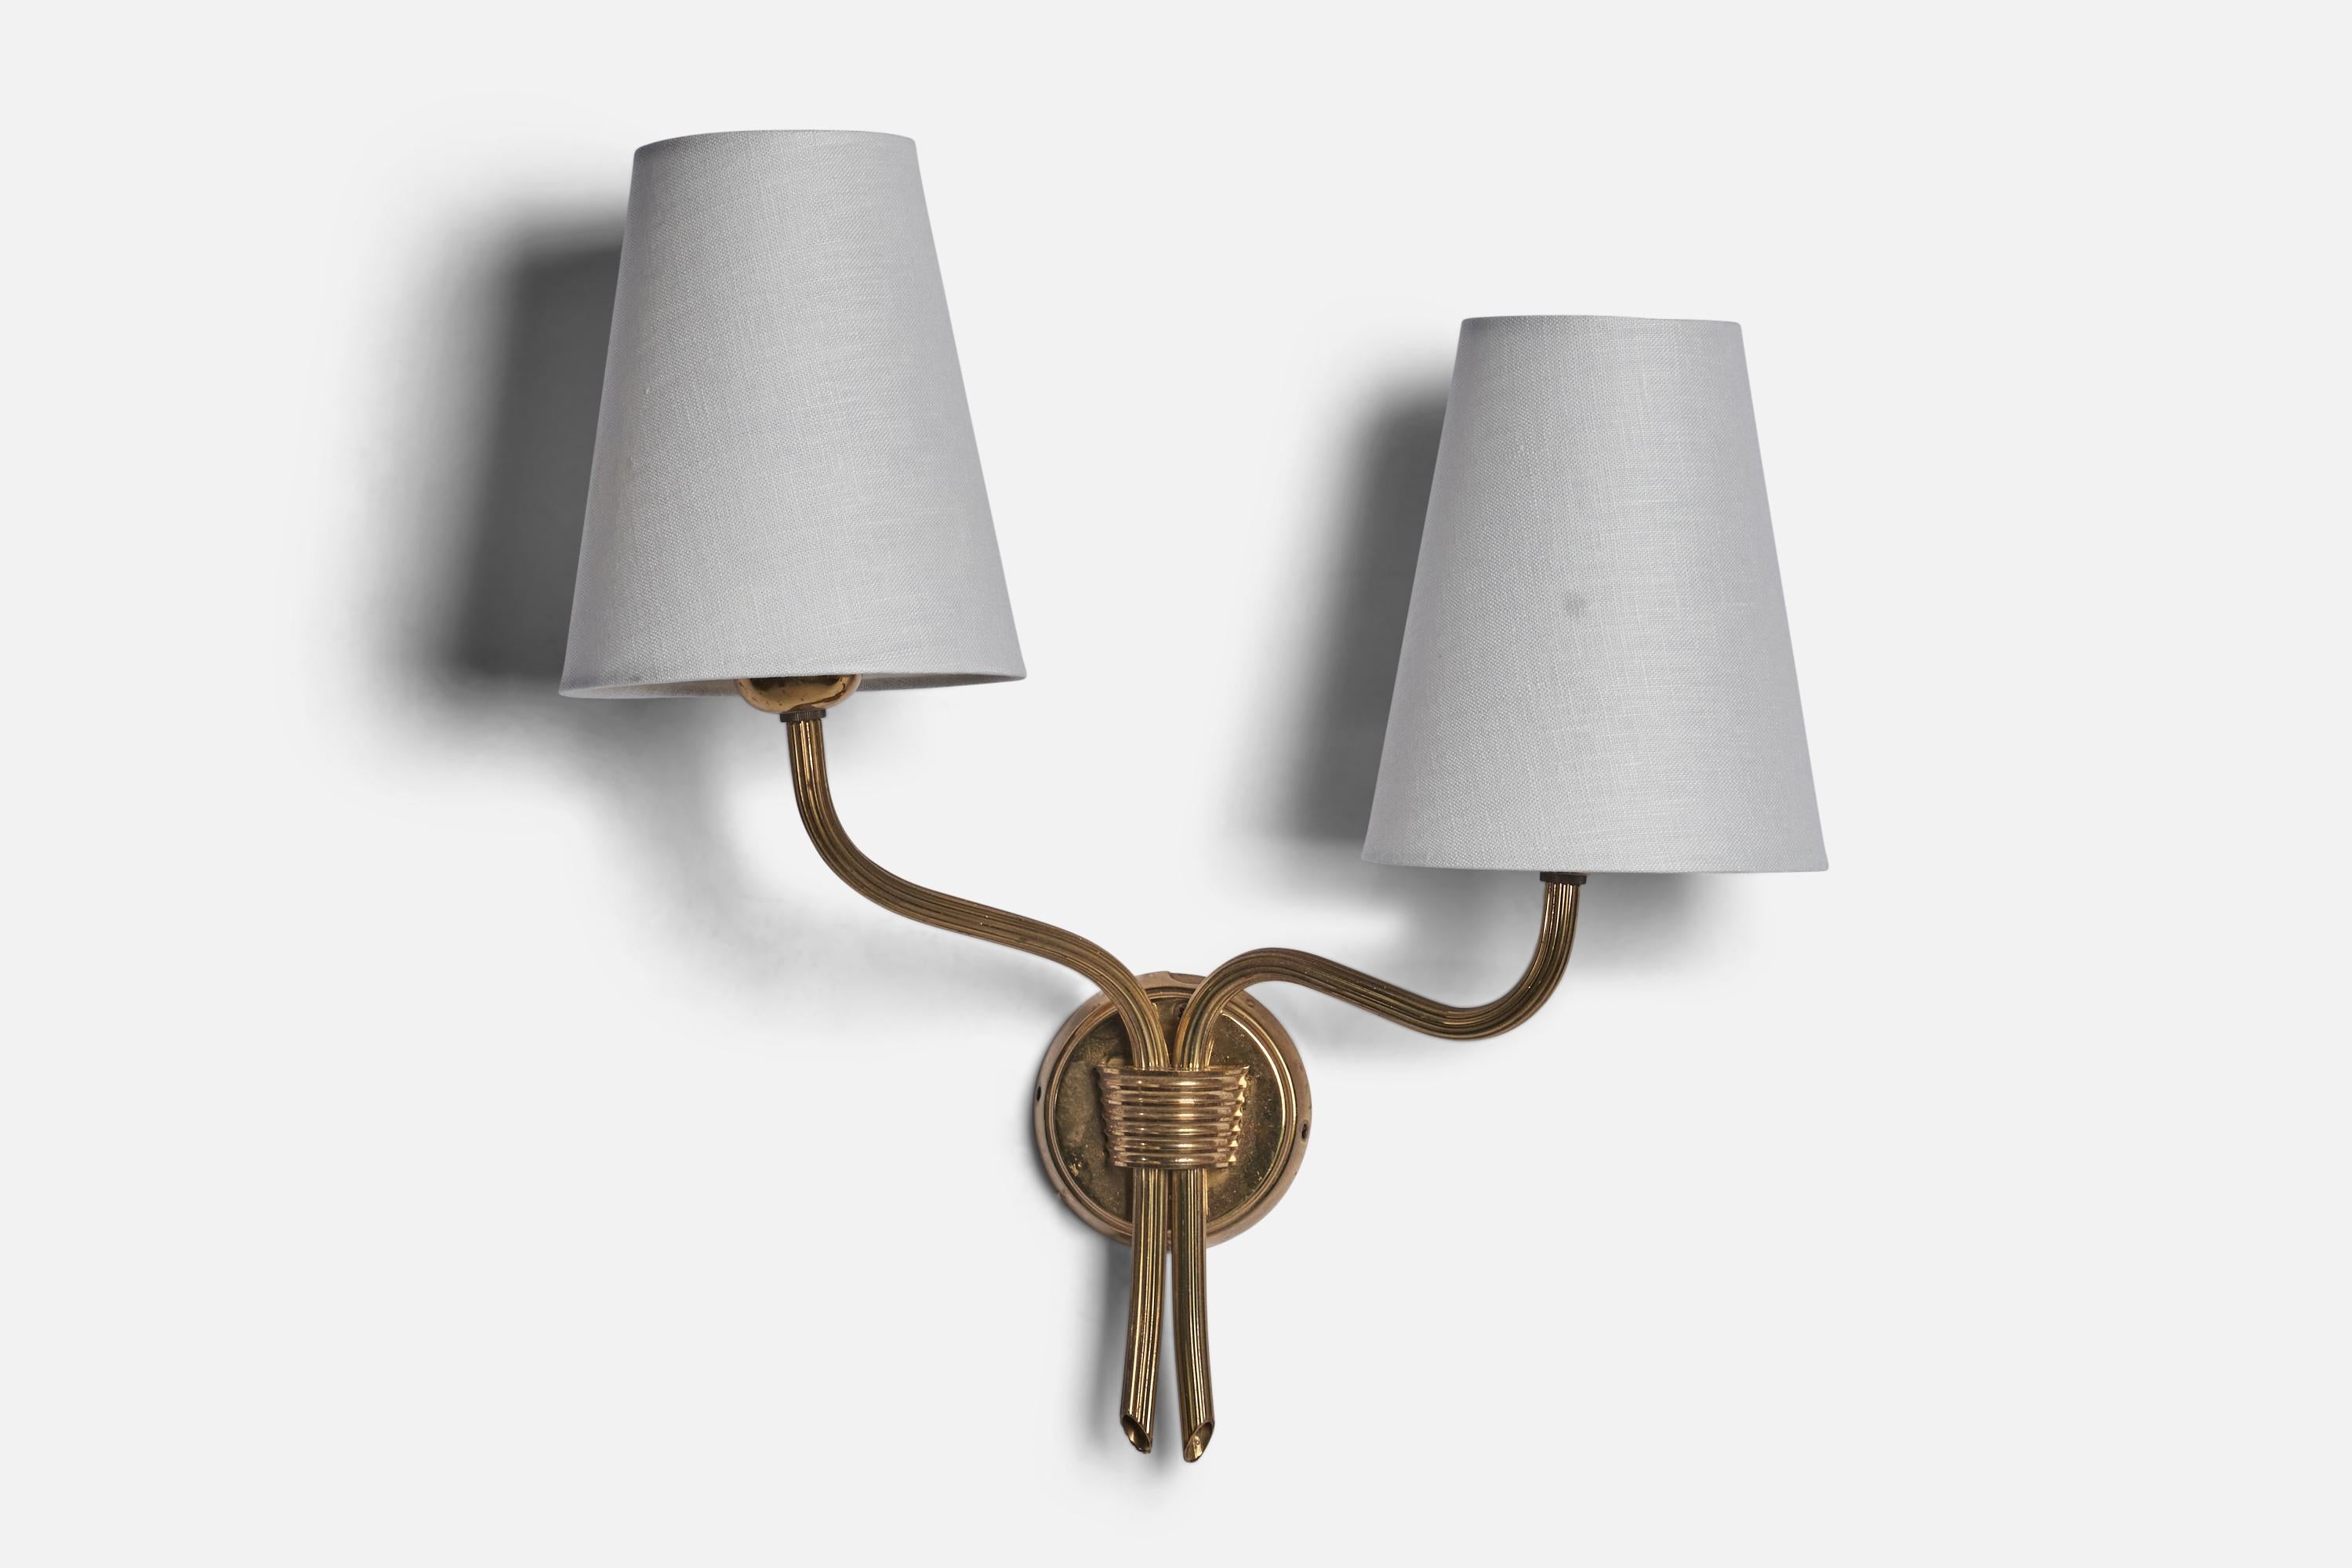 
A two-armed brass and white fabric wall light designed and produced in Sweden, 1940s.
Overall Dimensions (inches): 15.25” H x 13.5” W x 6.25” D
Back Plate Dimensions (inches): 3.1” Diameter
Bulb Specifications: E-26 Bulb
Number of Sockets: 2
All